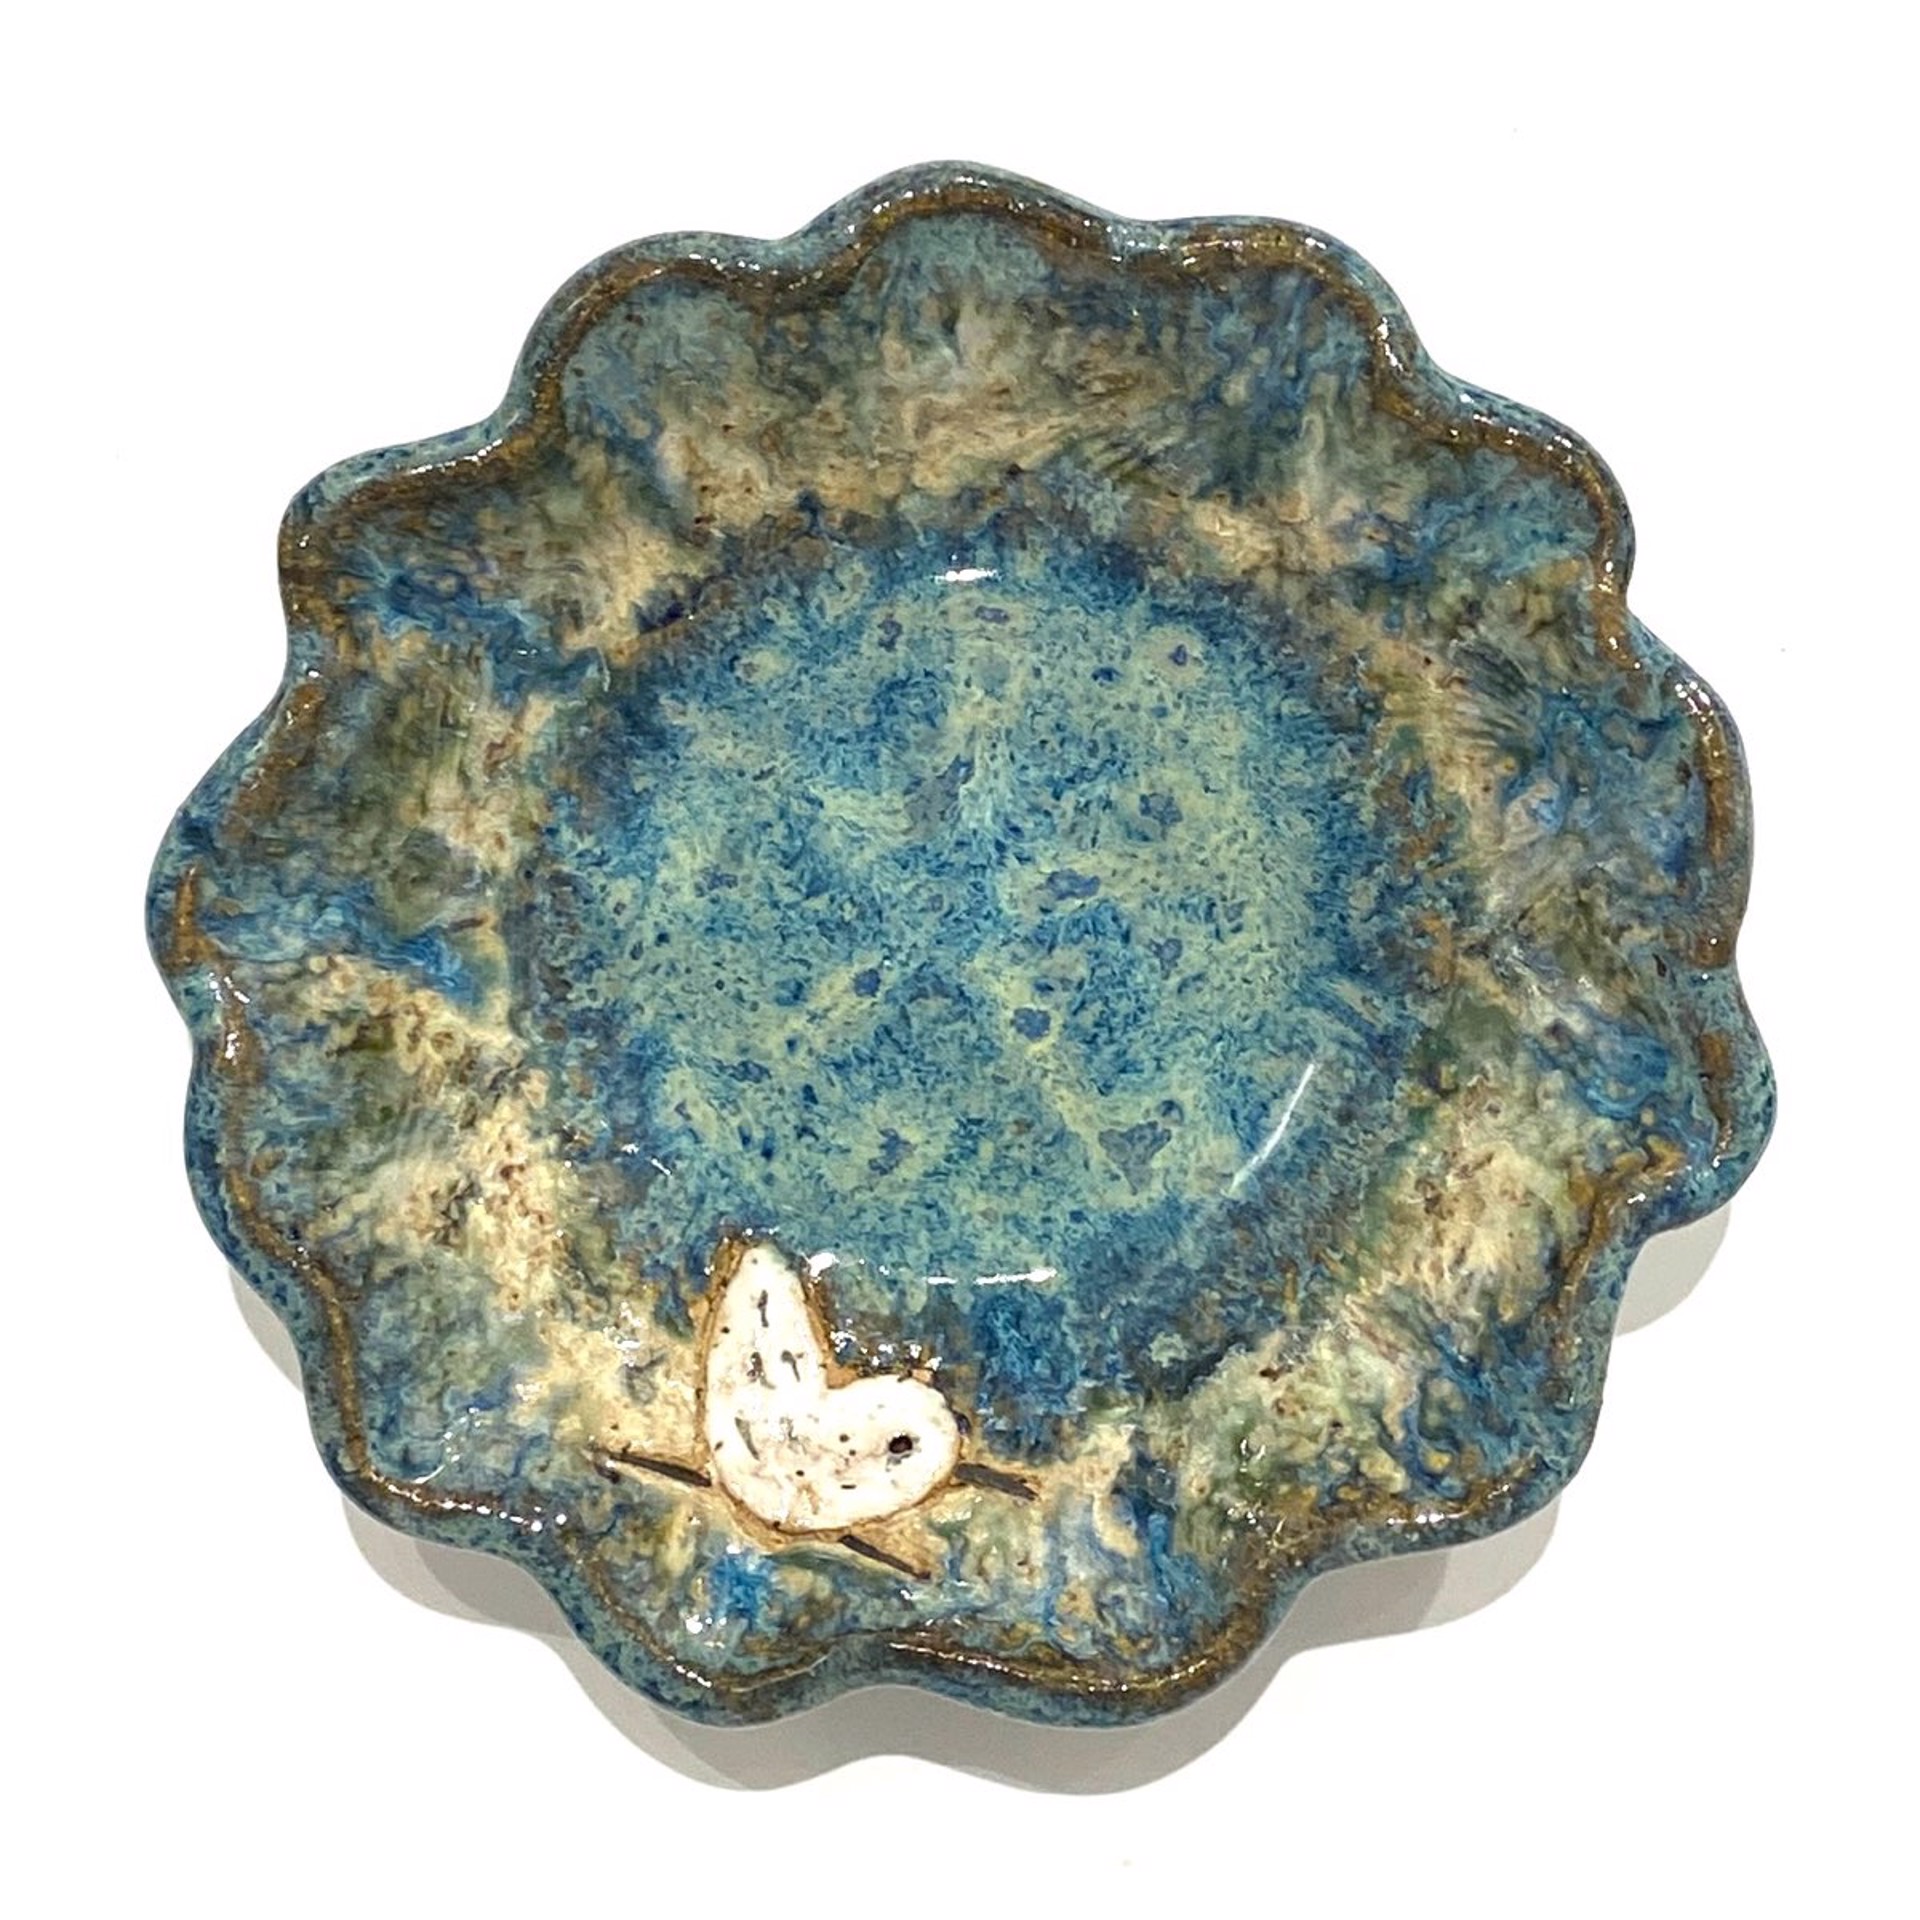 Small Round Scalloped Bowl with Sandpiper (Blue Glaze) LG23-1163 by Jim & Steffi Logan